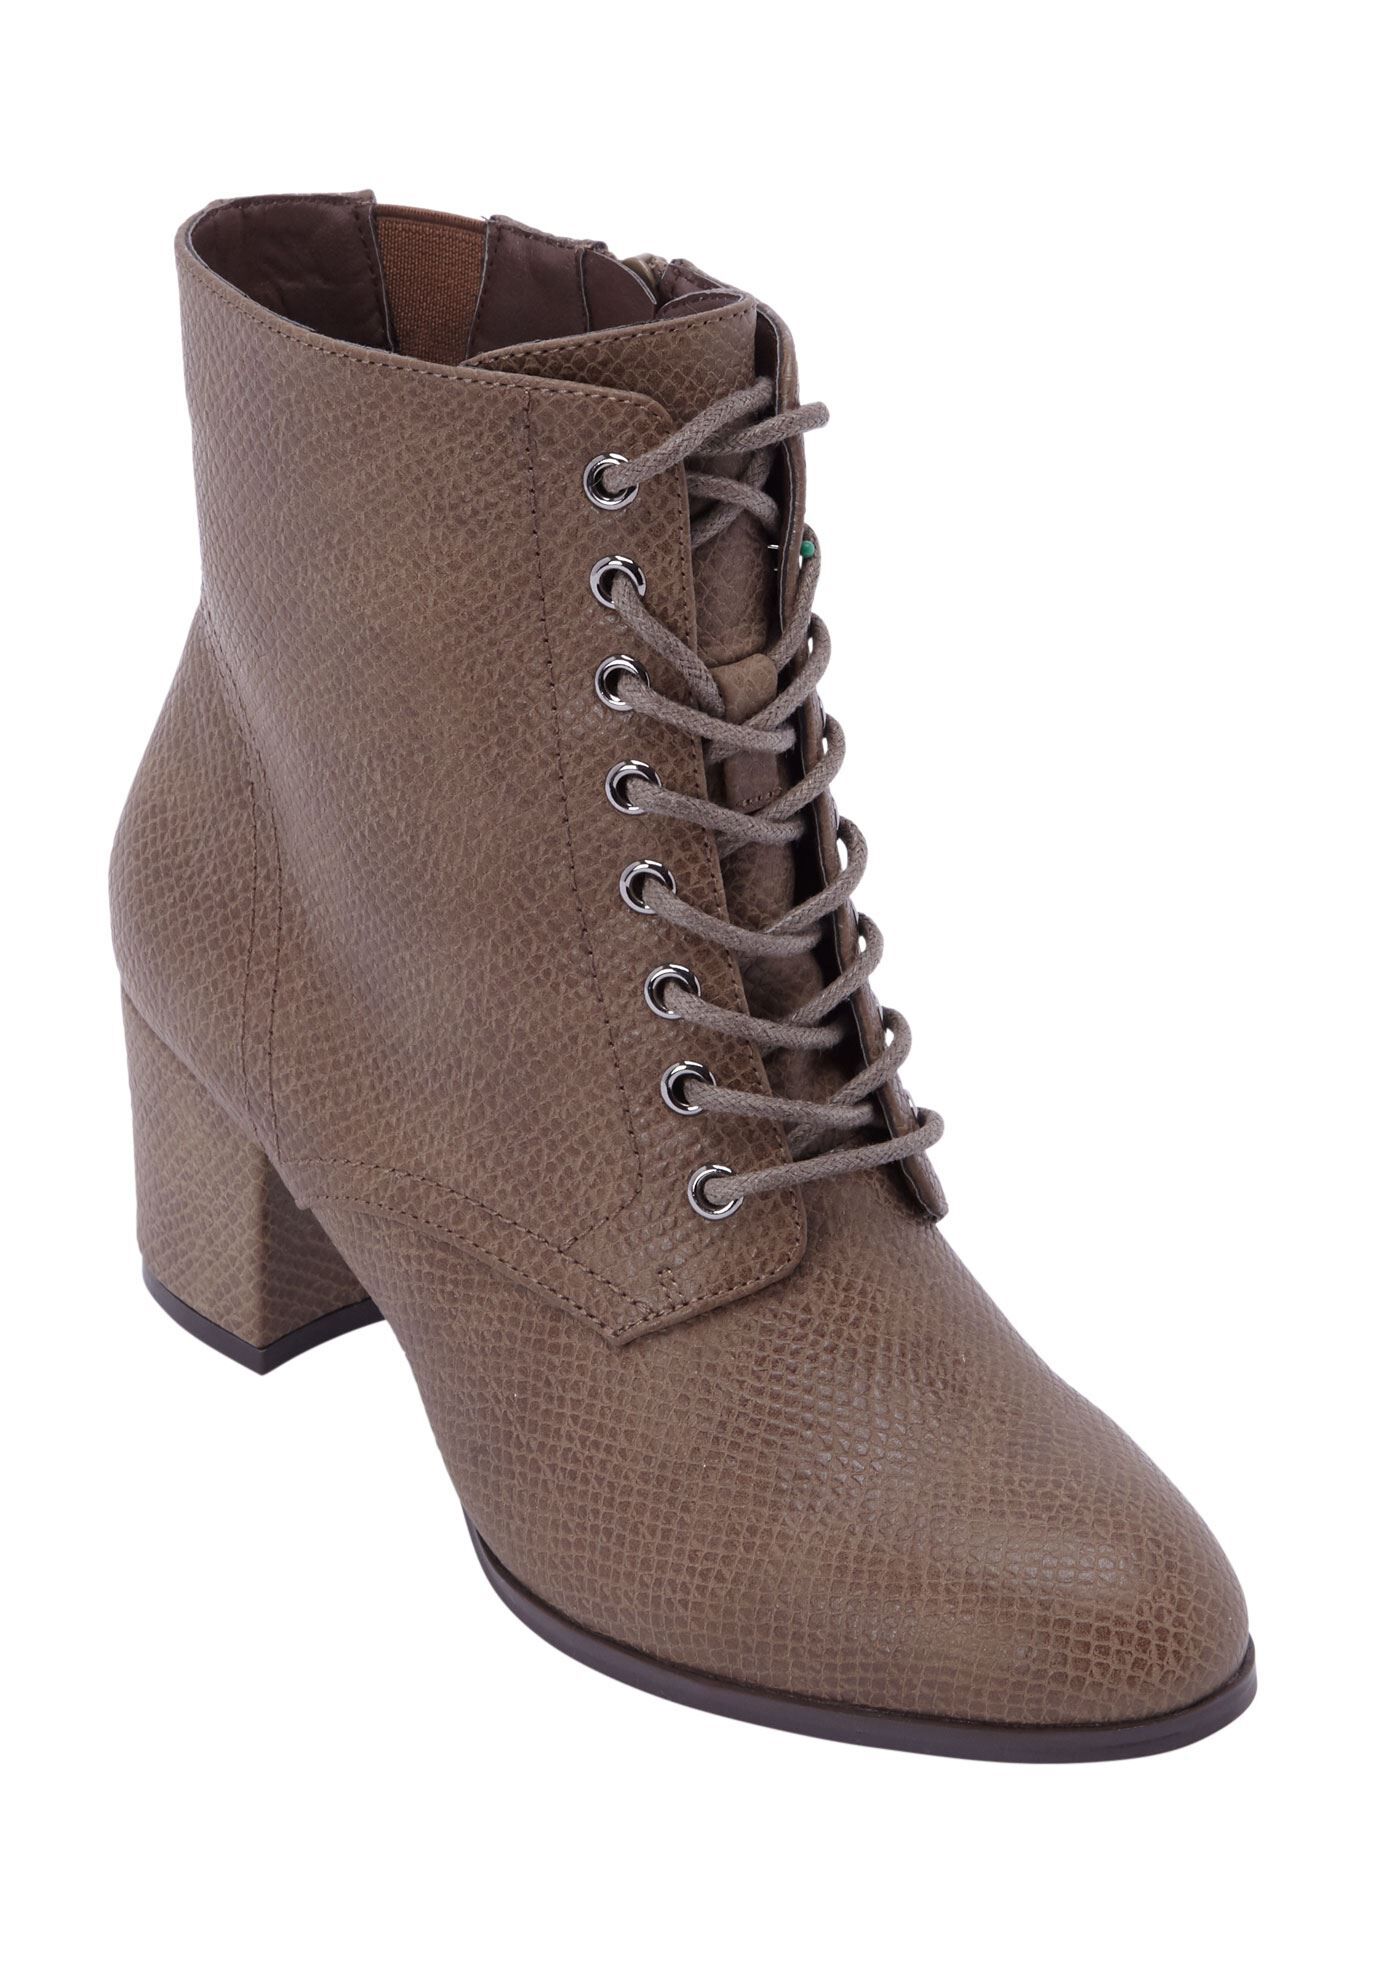 Ankle Boots \u0026 Booties | Jessica London